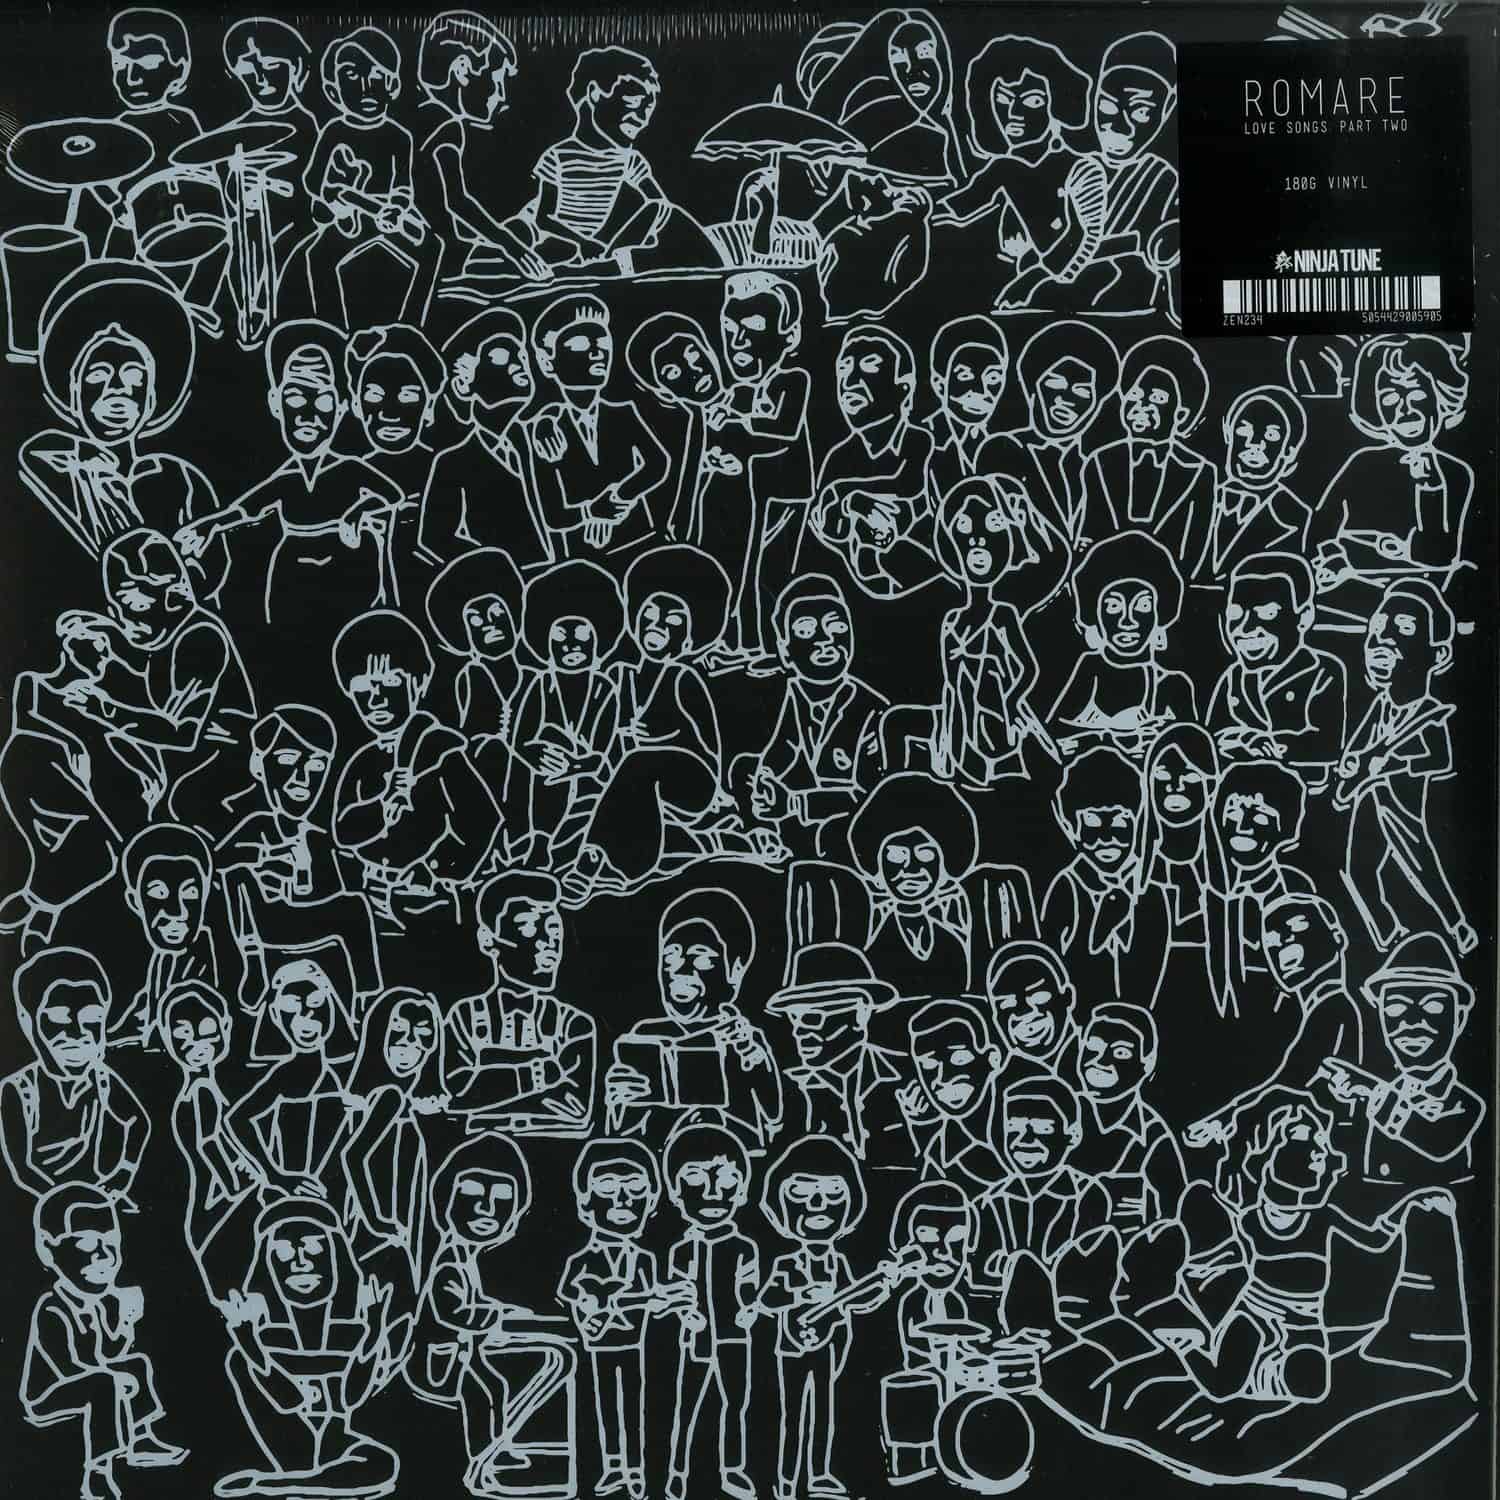 Romare - LOVE SONGS: PART TWO 